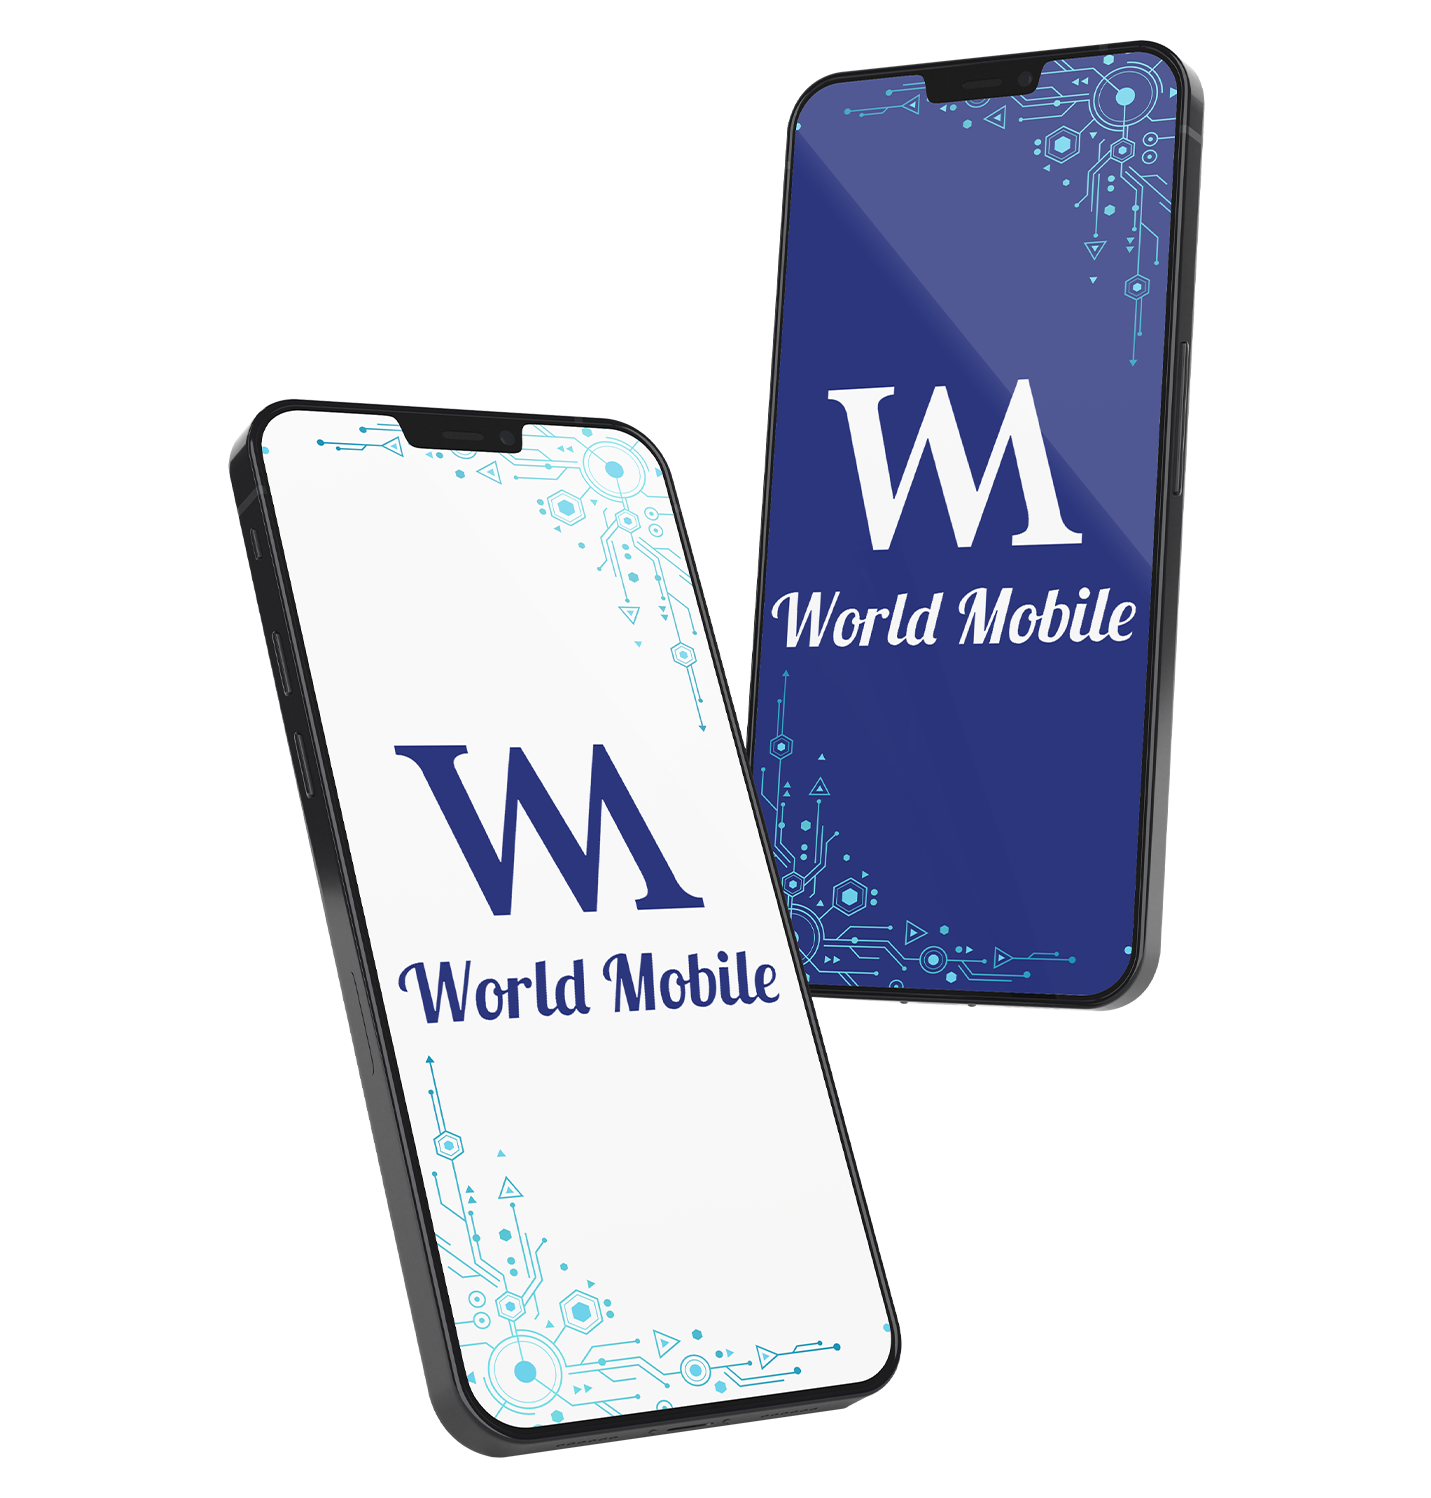 1 worldmobile-repair-mobile-tablet-france-smartphone-fix-screen-iphone-androind